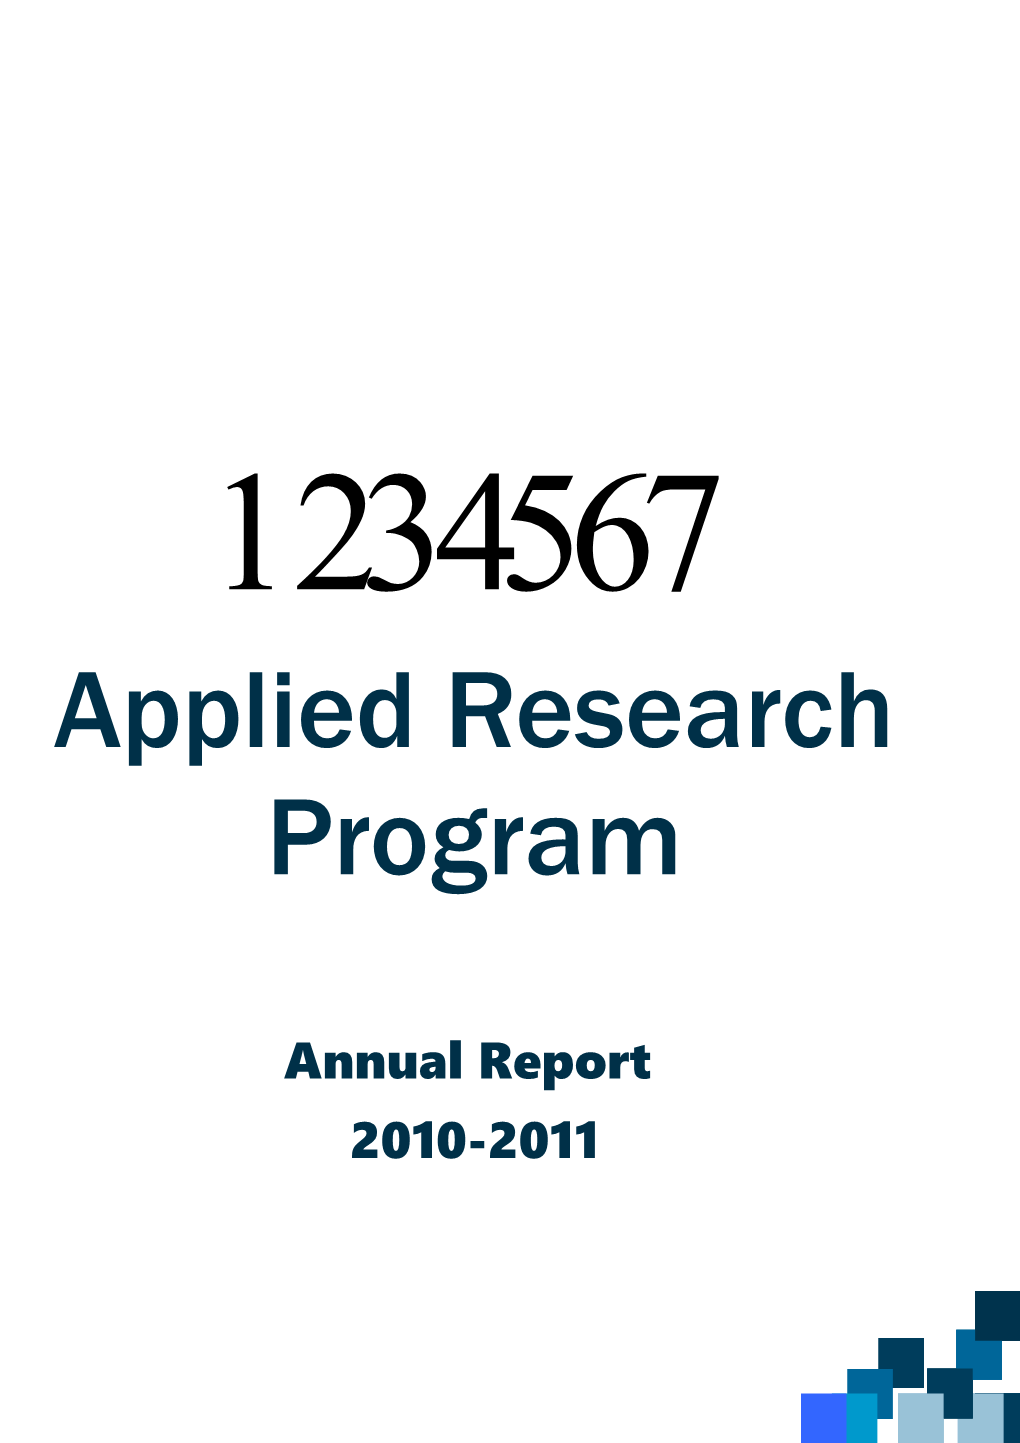 Any Enquiries About the Applied Research Program Can Be Directed To